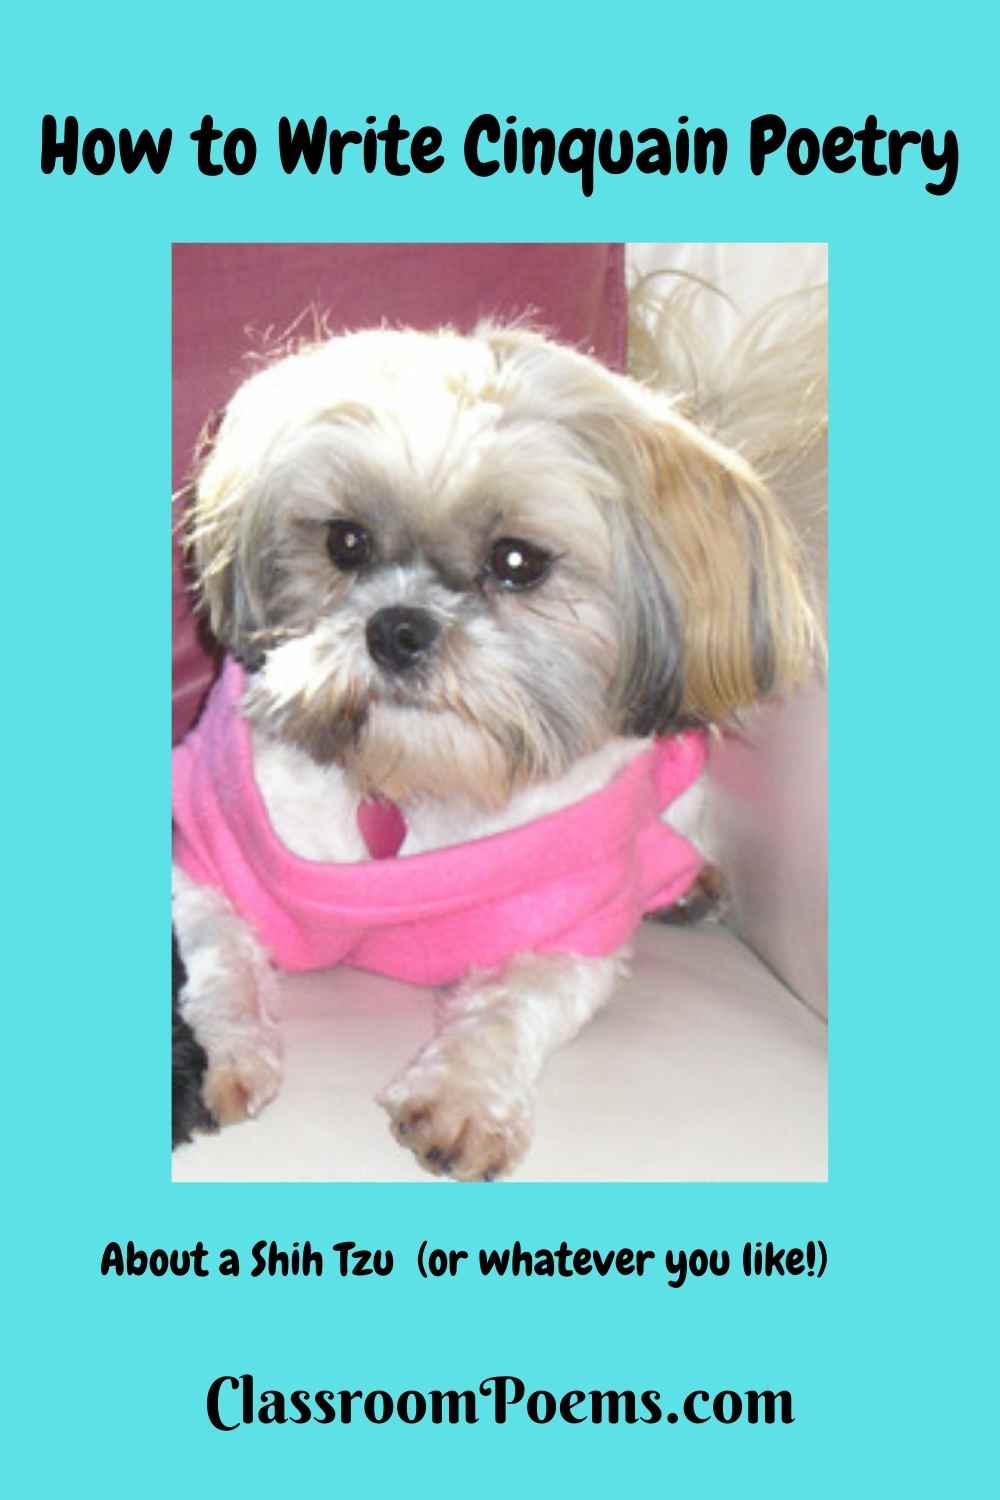 SHIH TZU Cinquain Poem by the Poetry Lady Denise Rodgers on ClassroomPoems.com.